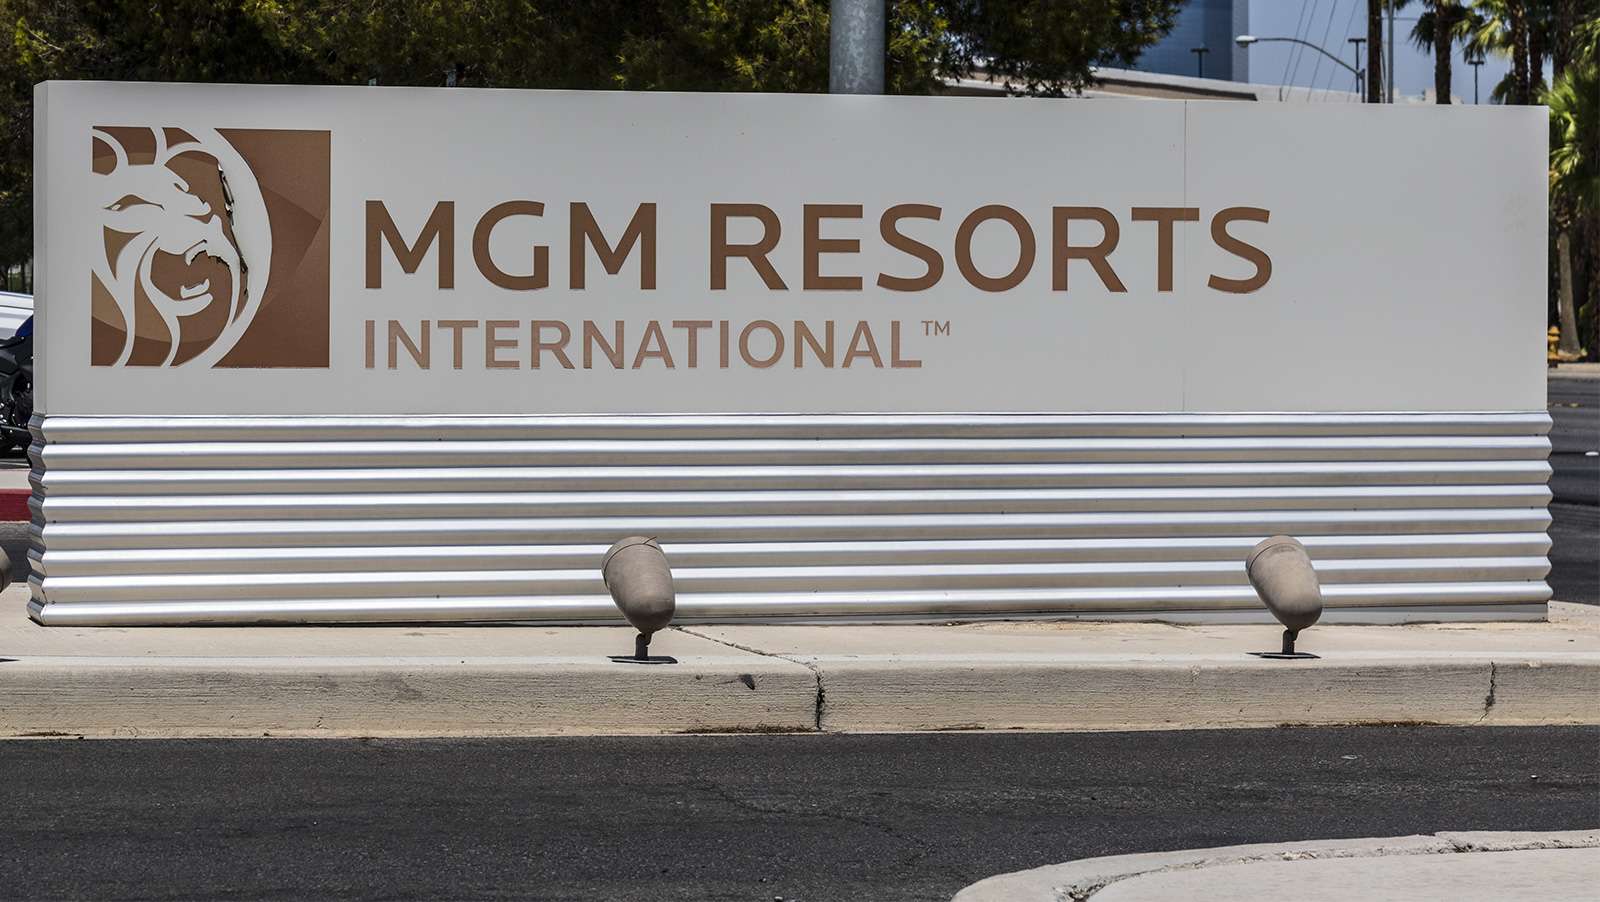 MGM appoints new president of entertainment